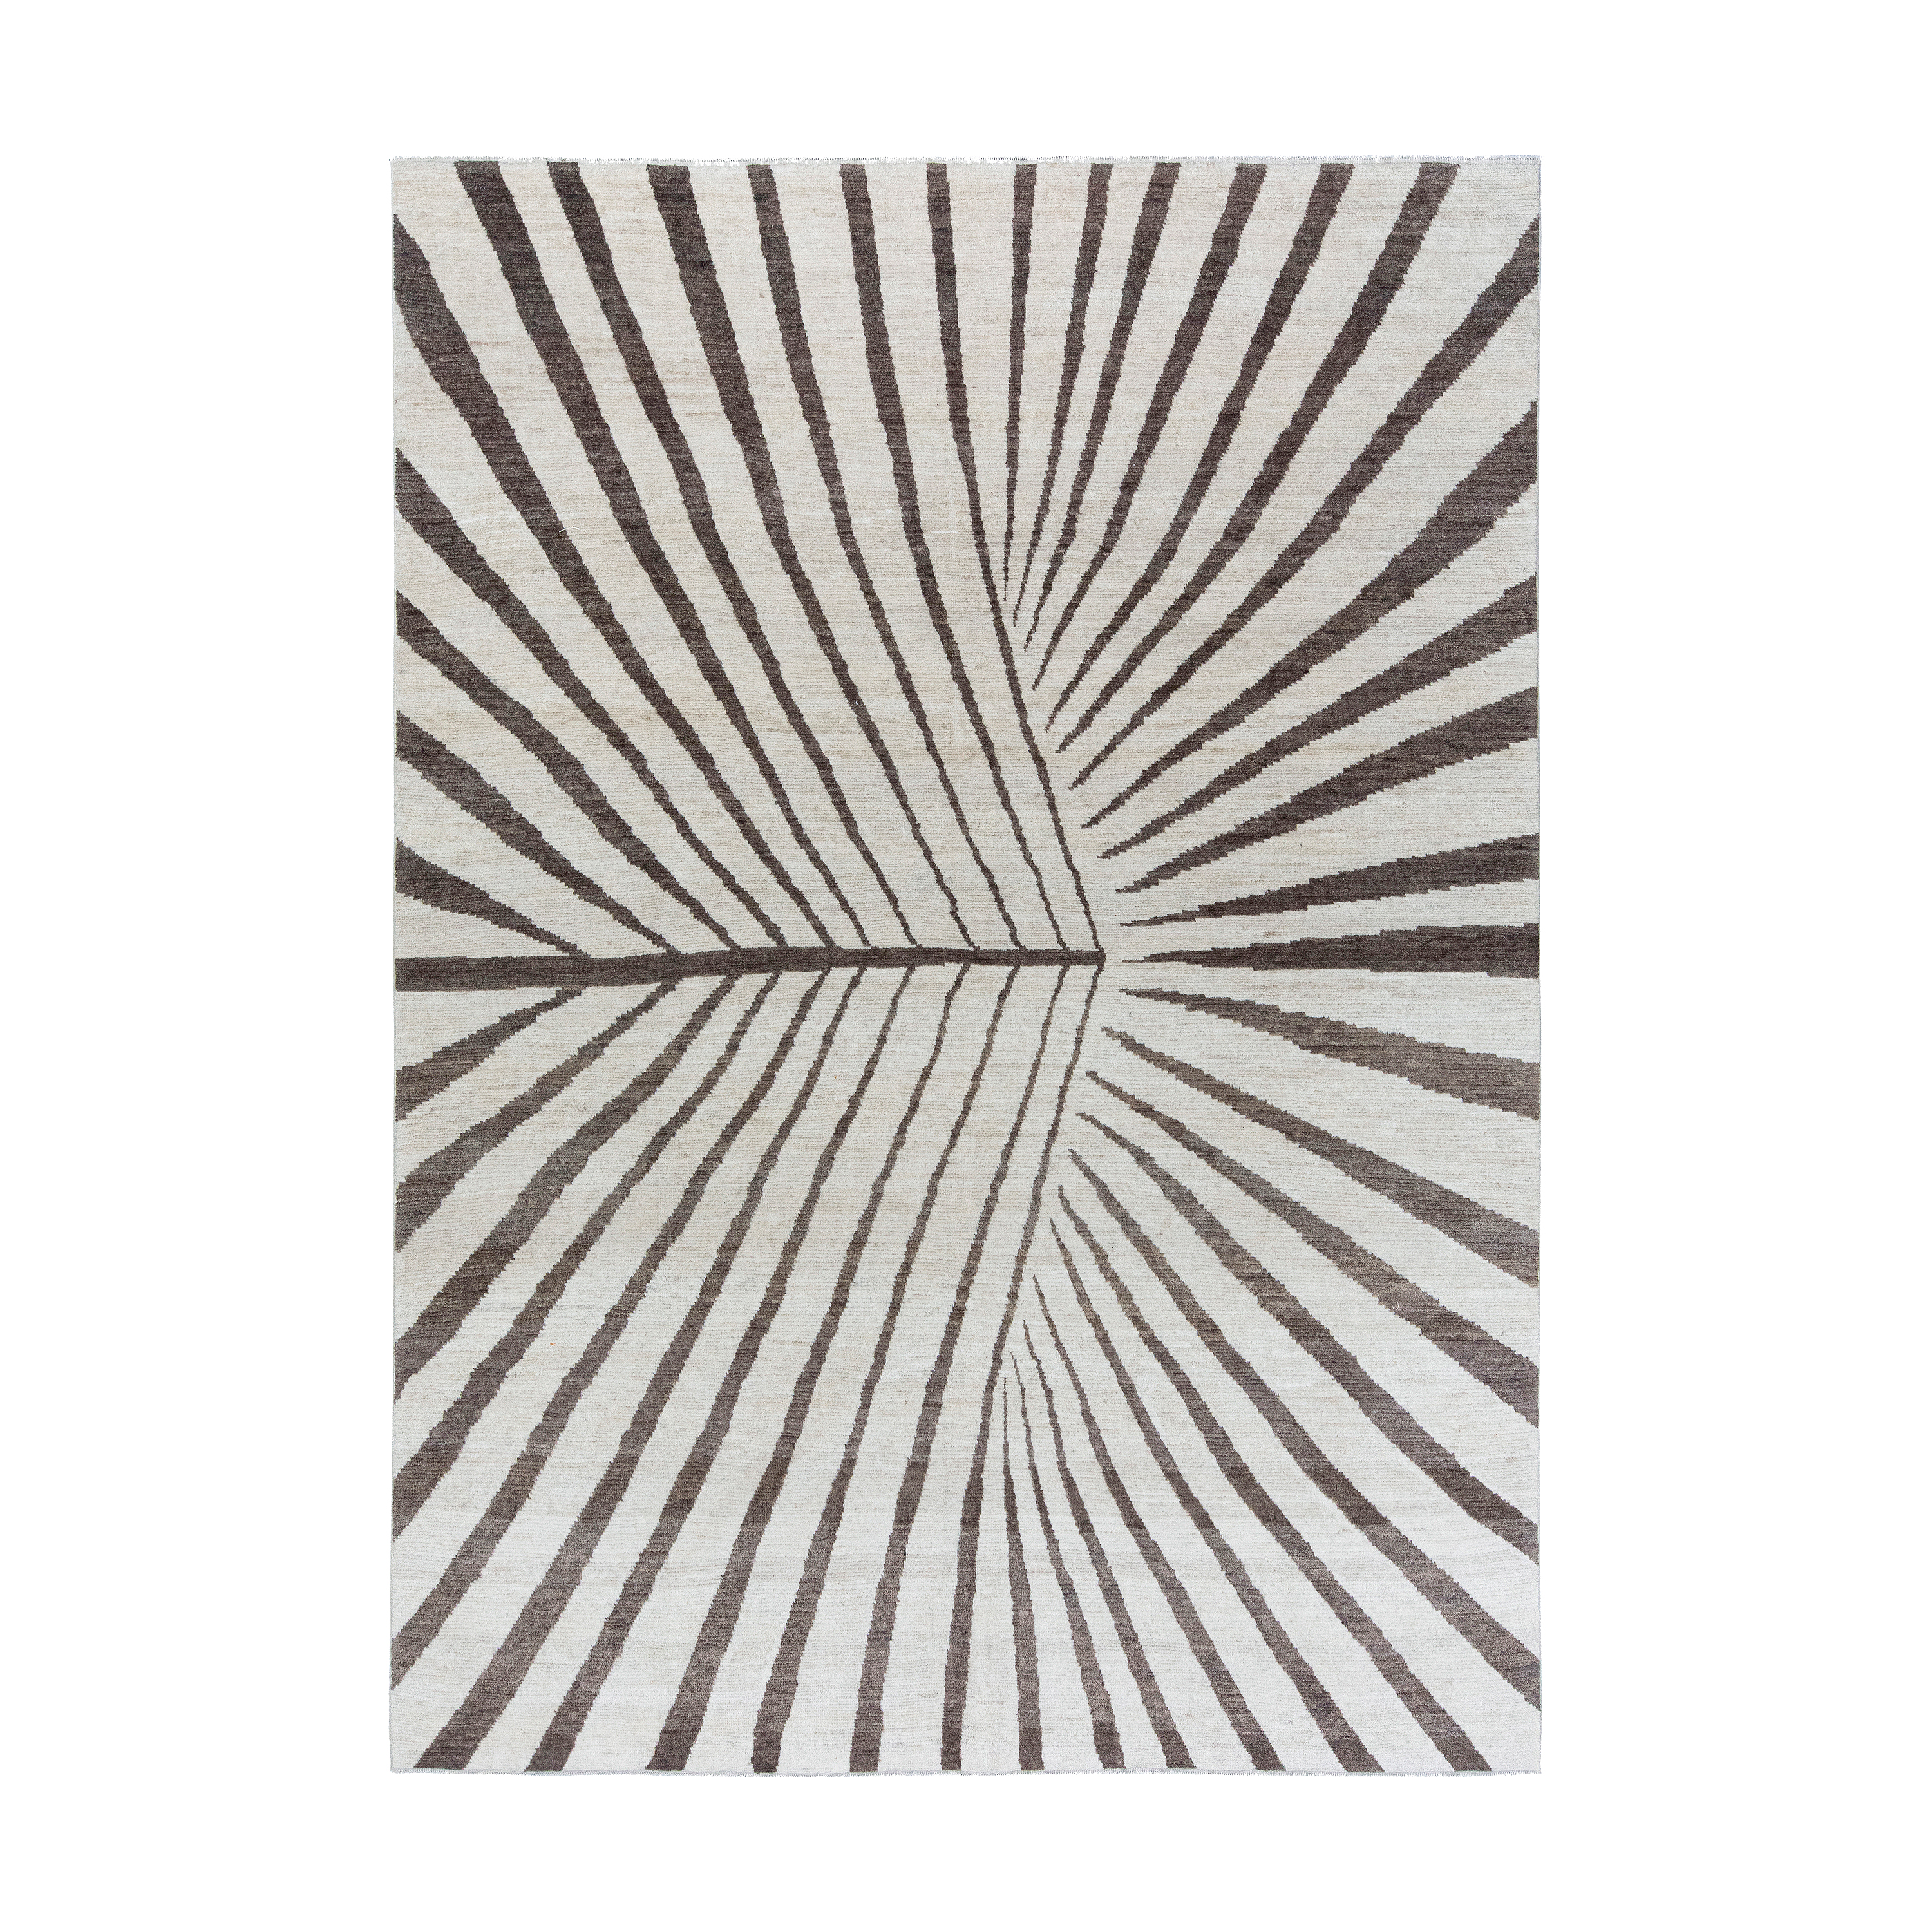 Astor rug is handmade using the finest quality wool and natural dyes, consisting of a minimal design. 